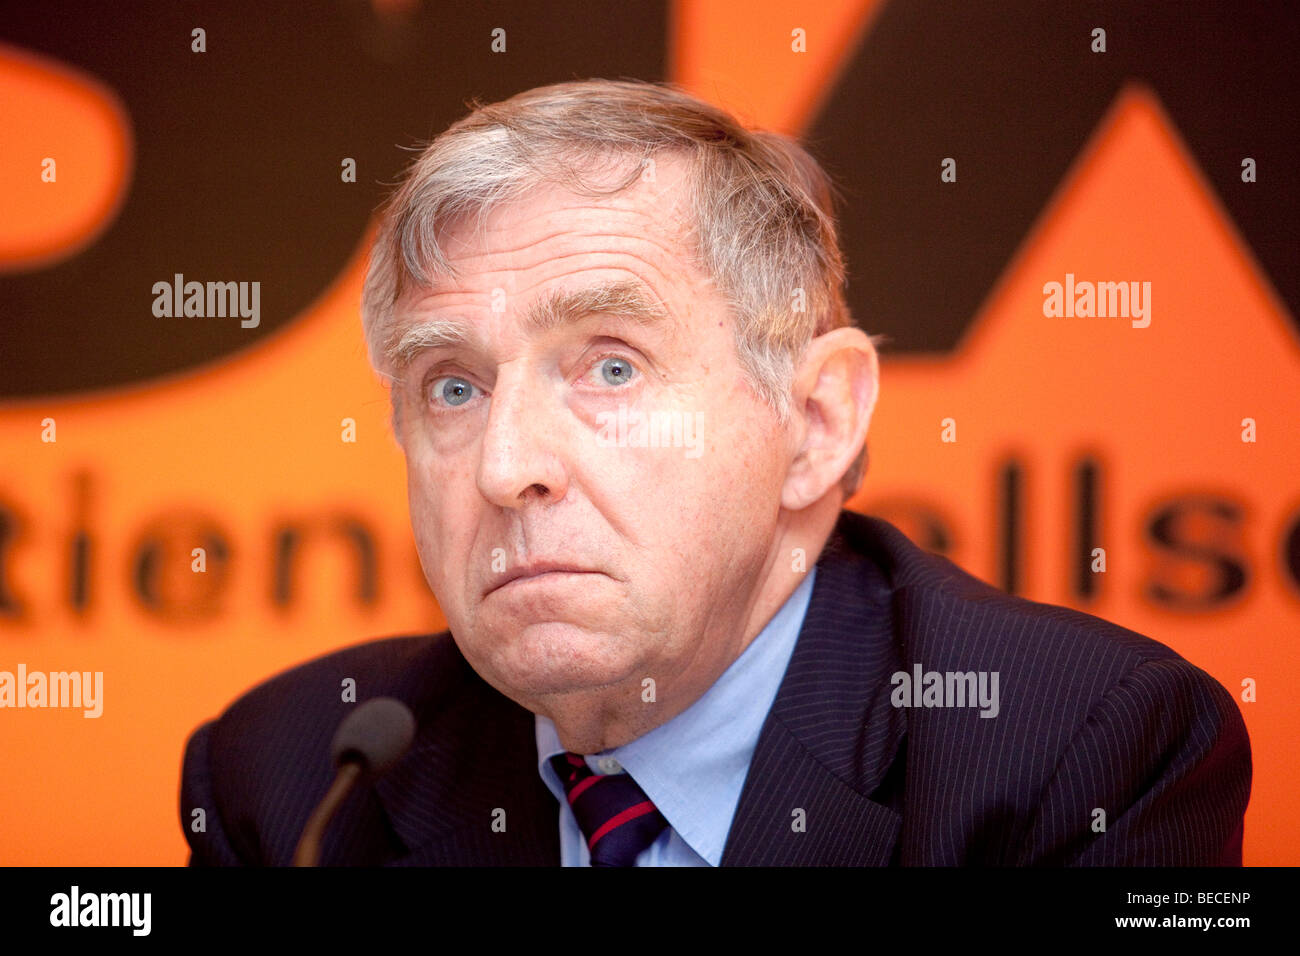 Erich Sixt, chief executive and main shareholder of the Sixt AG, during the press conference on financial statements, 19.03.200 Stock Photo